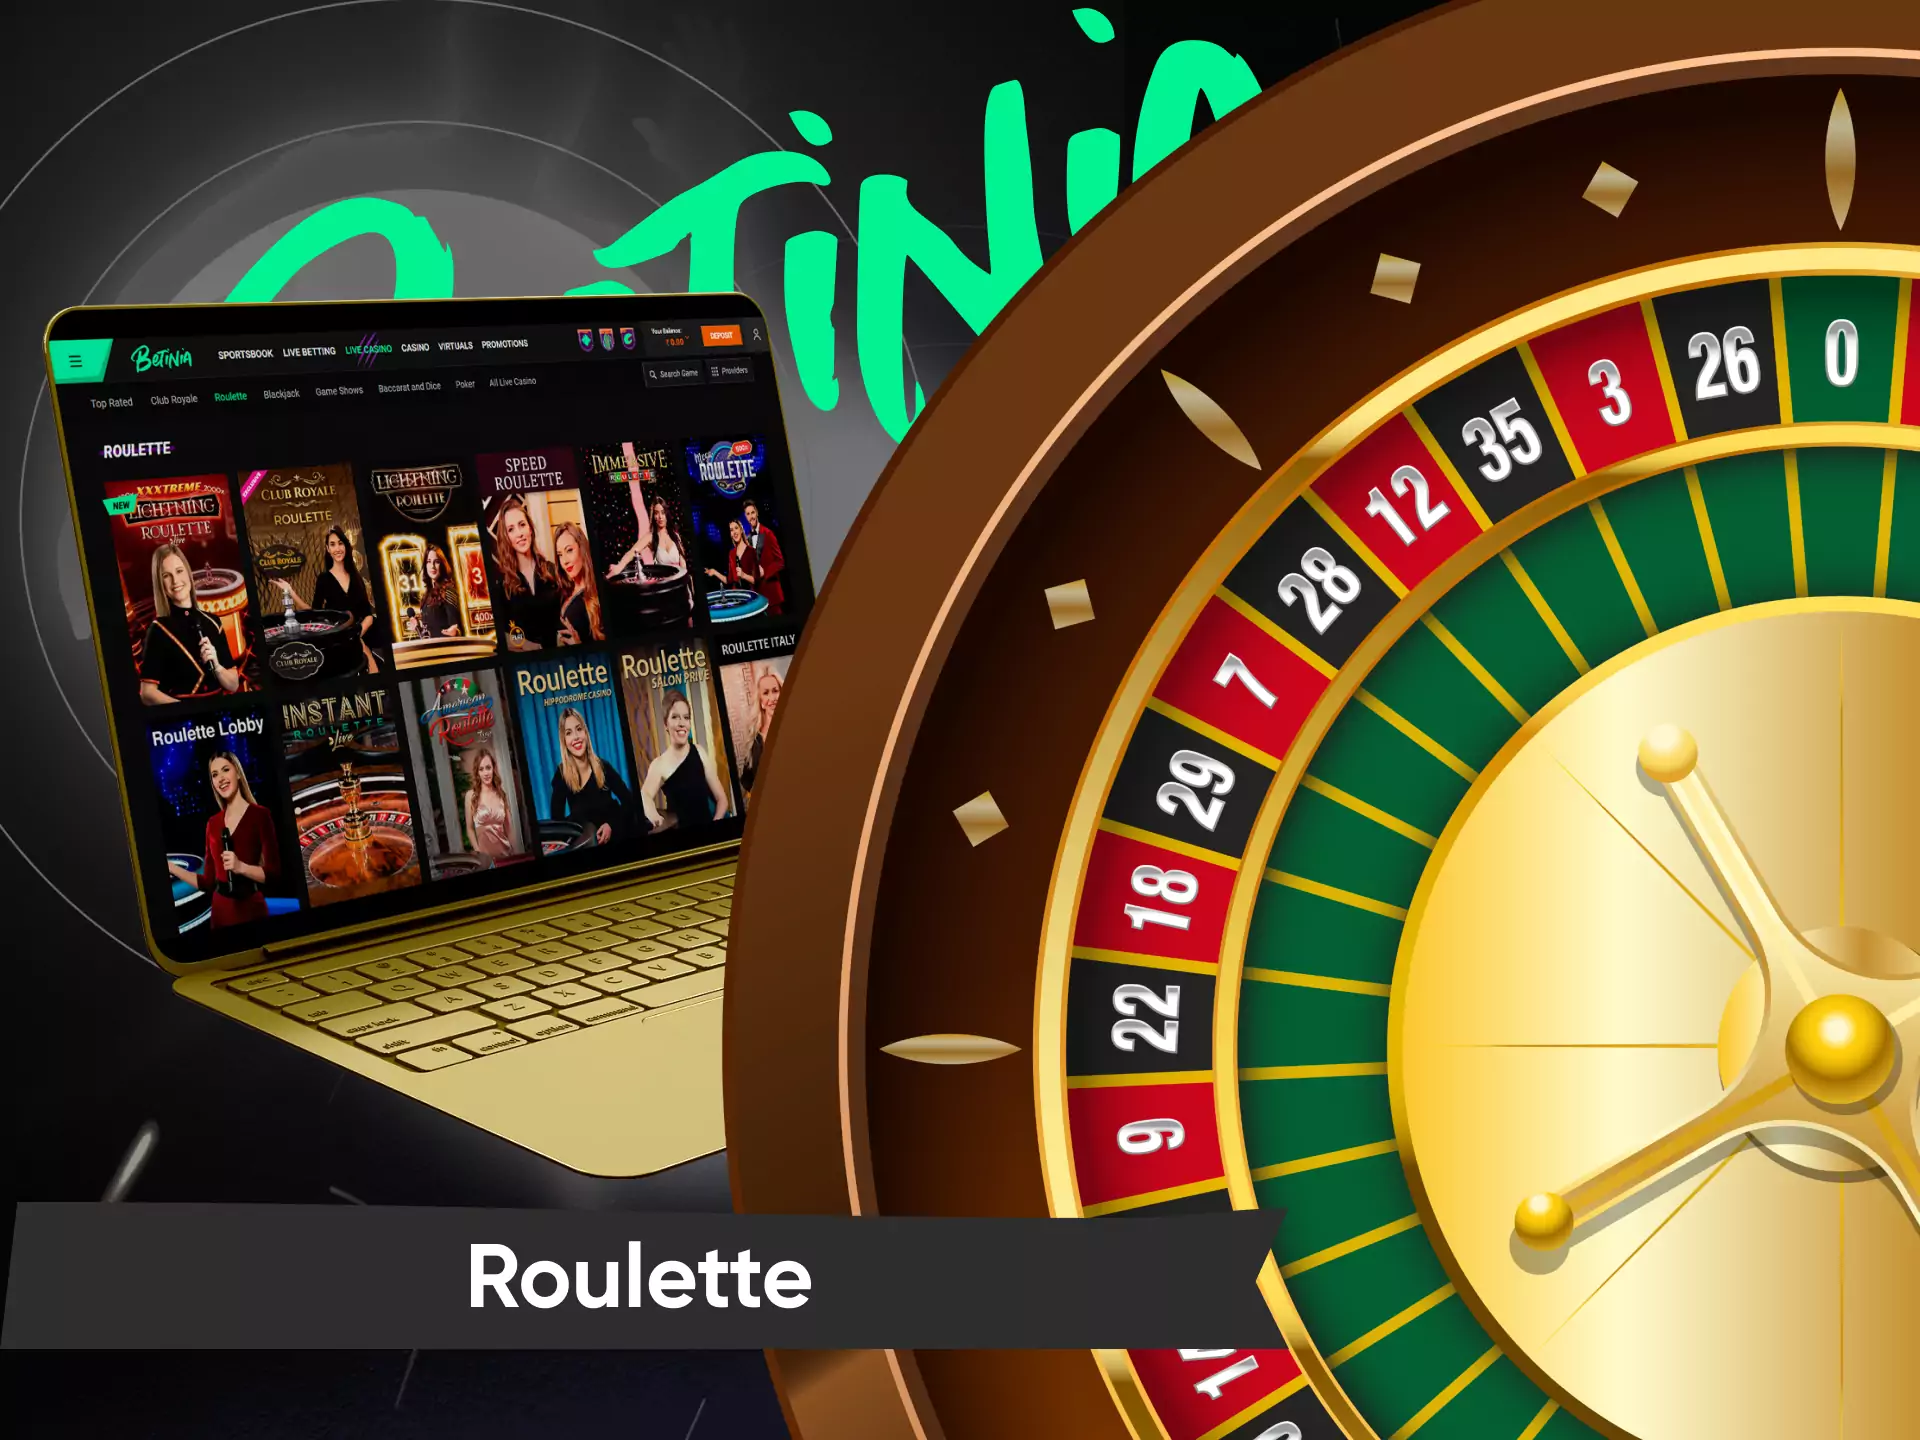 On Betinia, you find different types of roulette.